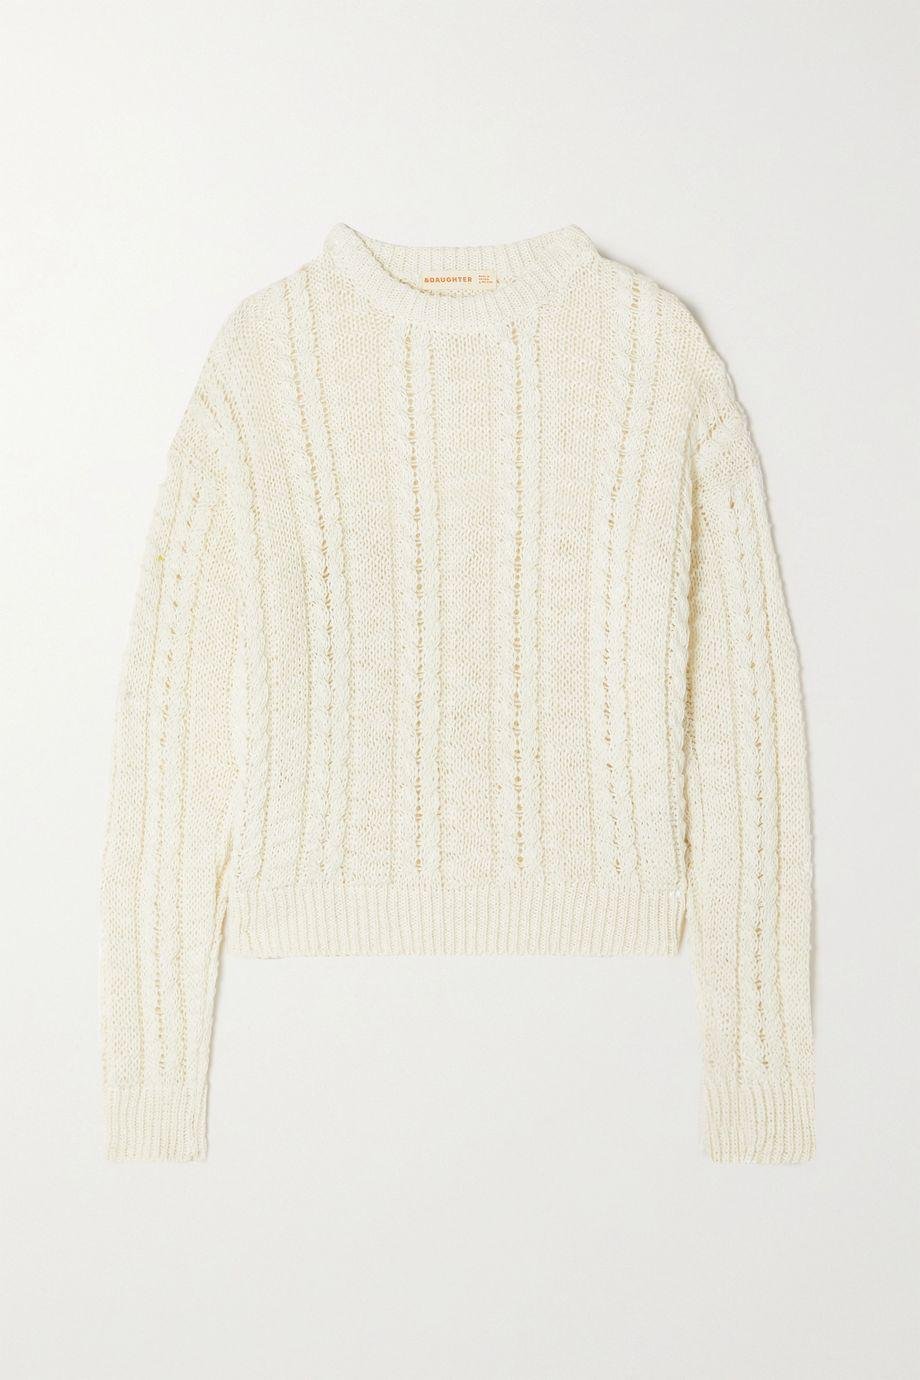 + NET SUSTAIN cable-knit linen and cotton-blend sweater by &DAUGHTER